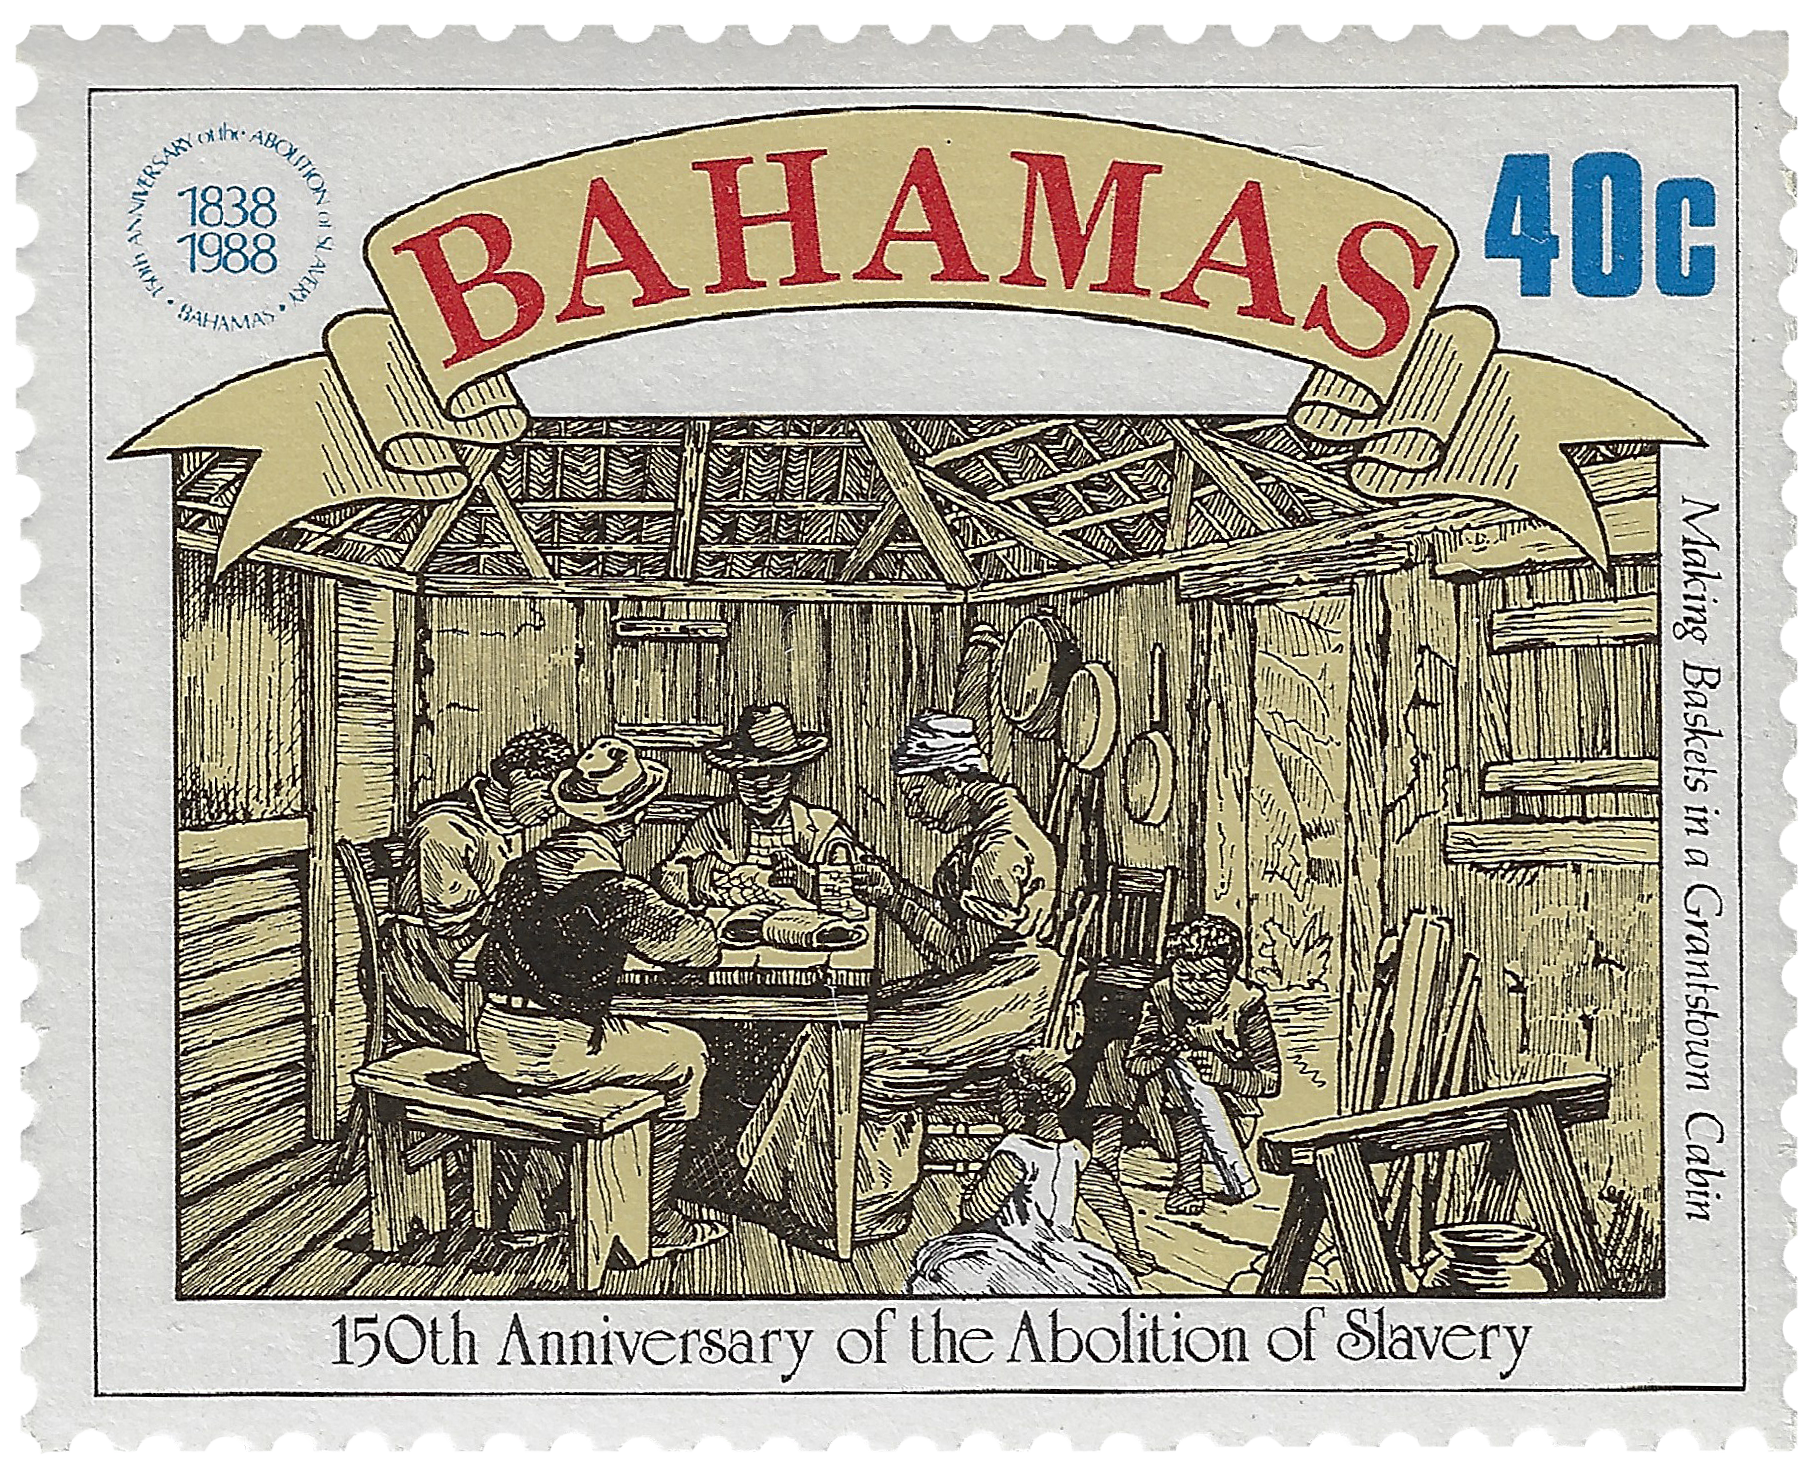 40c 1988, 151st Anniversary of the Abolition of Slavery, Making Baskets in a Grandstown Cabin